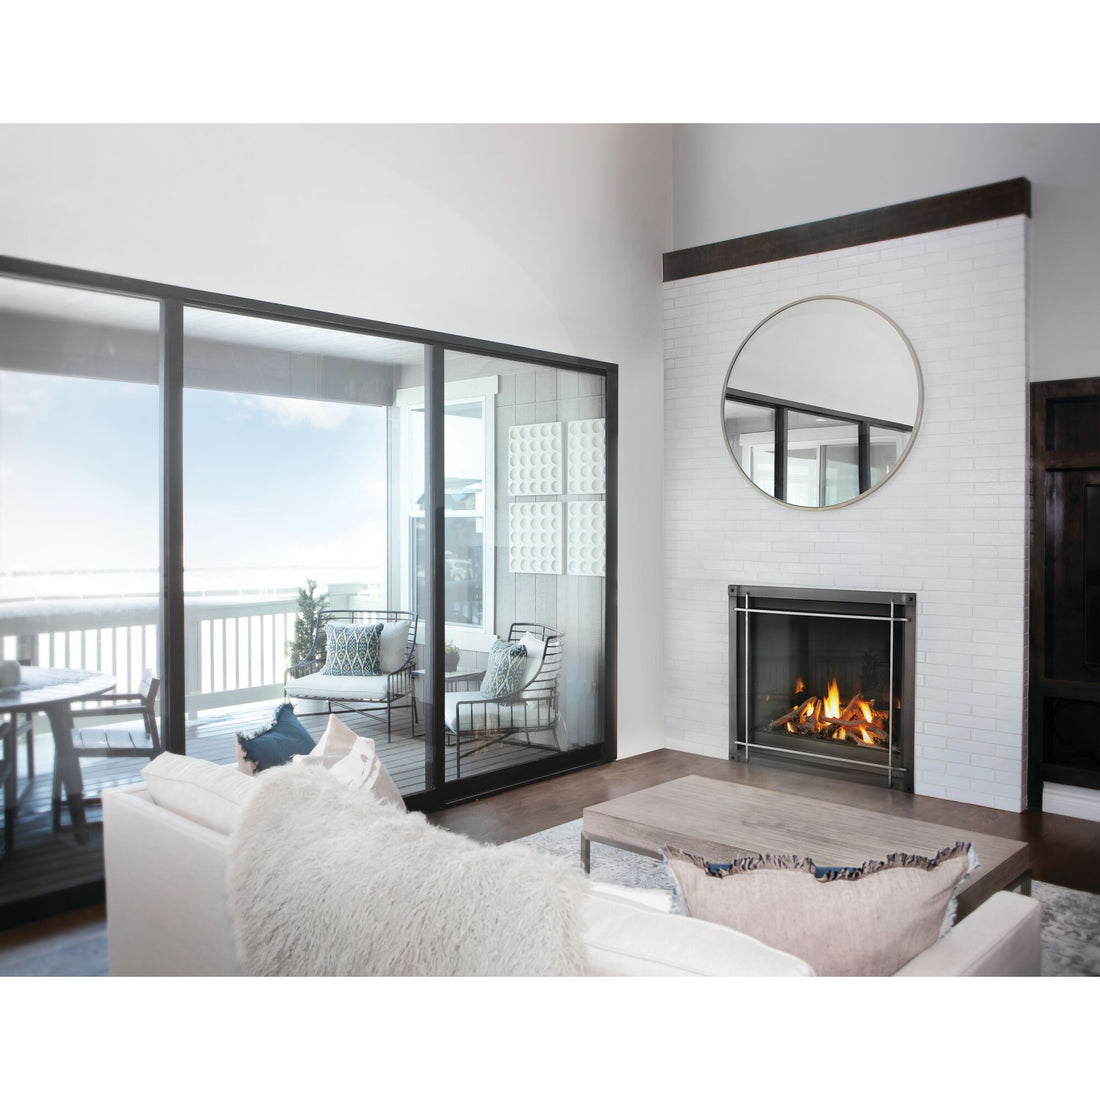 How to Choose the Right Type of Fireplace for Your Space